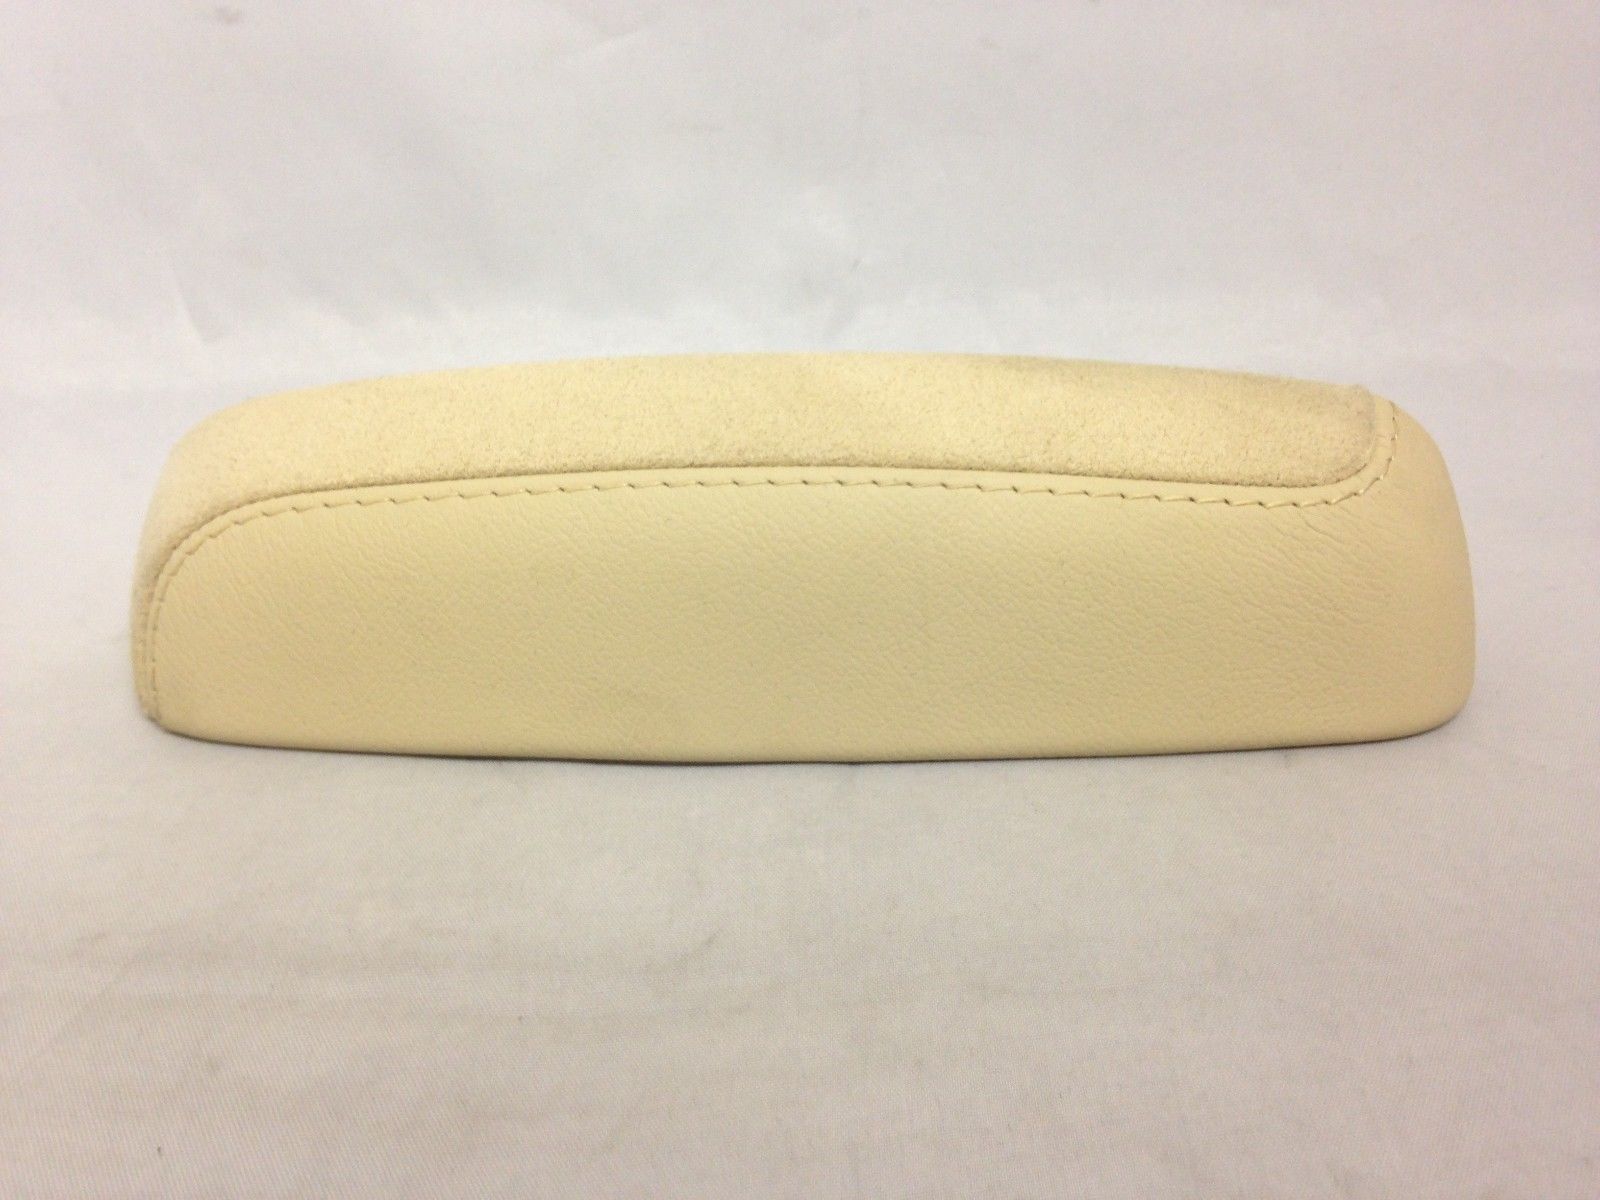 Cadillac CTS 2014+ center console end cap leather cream NEW